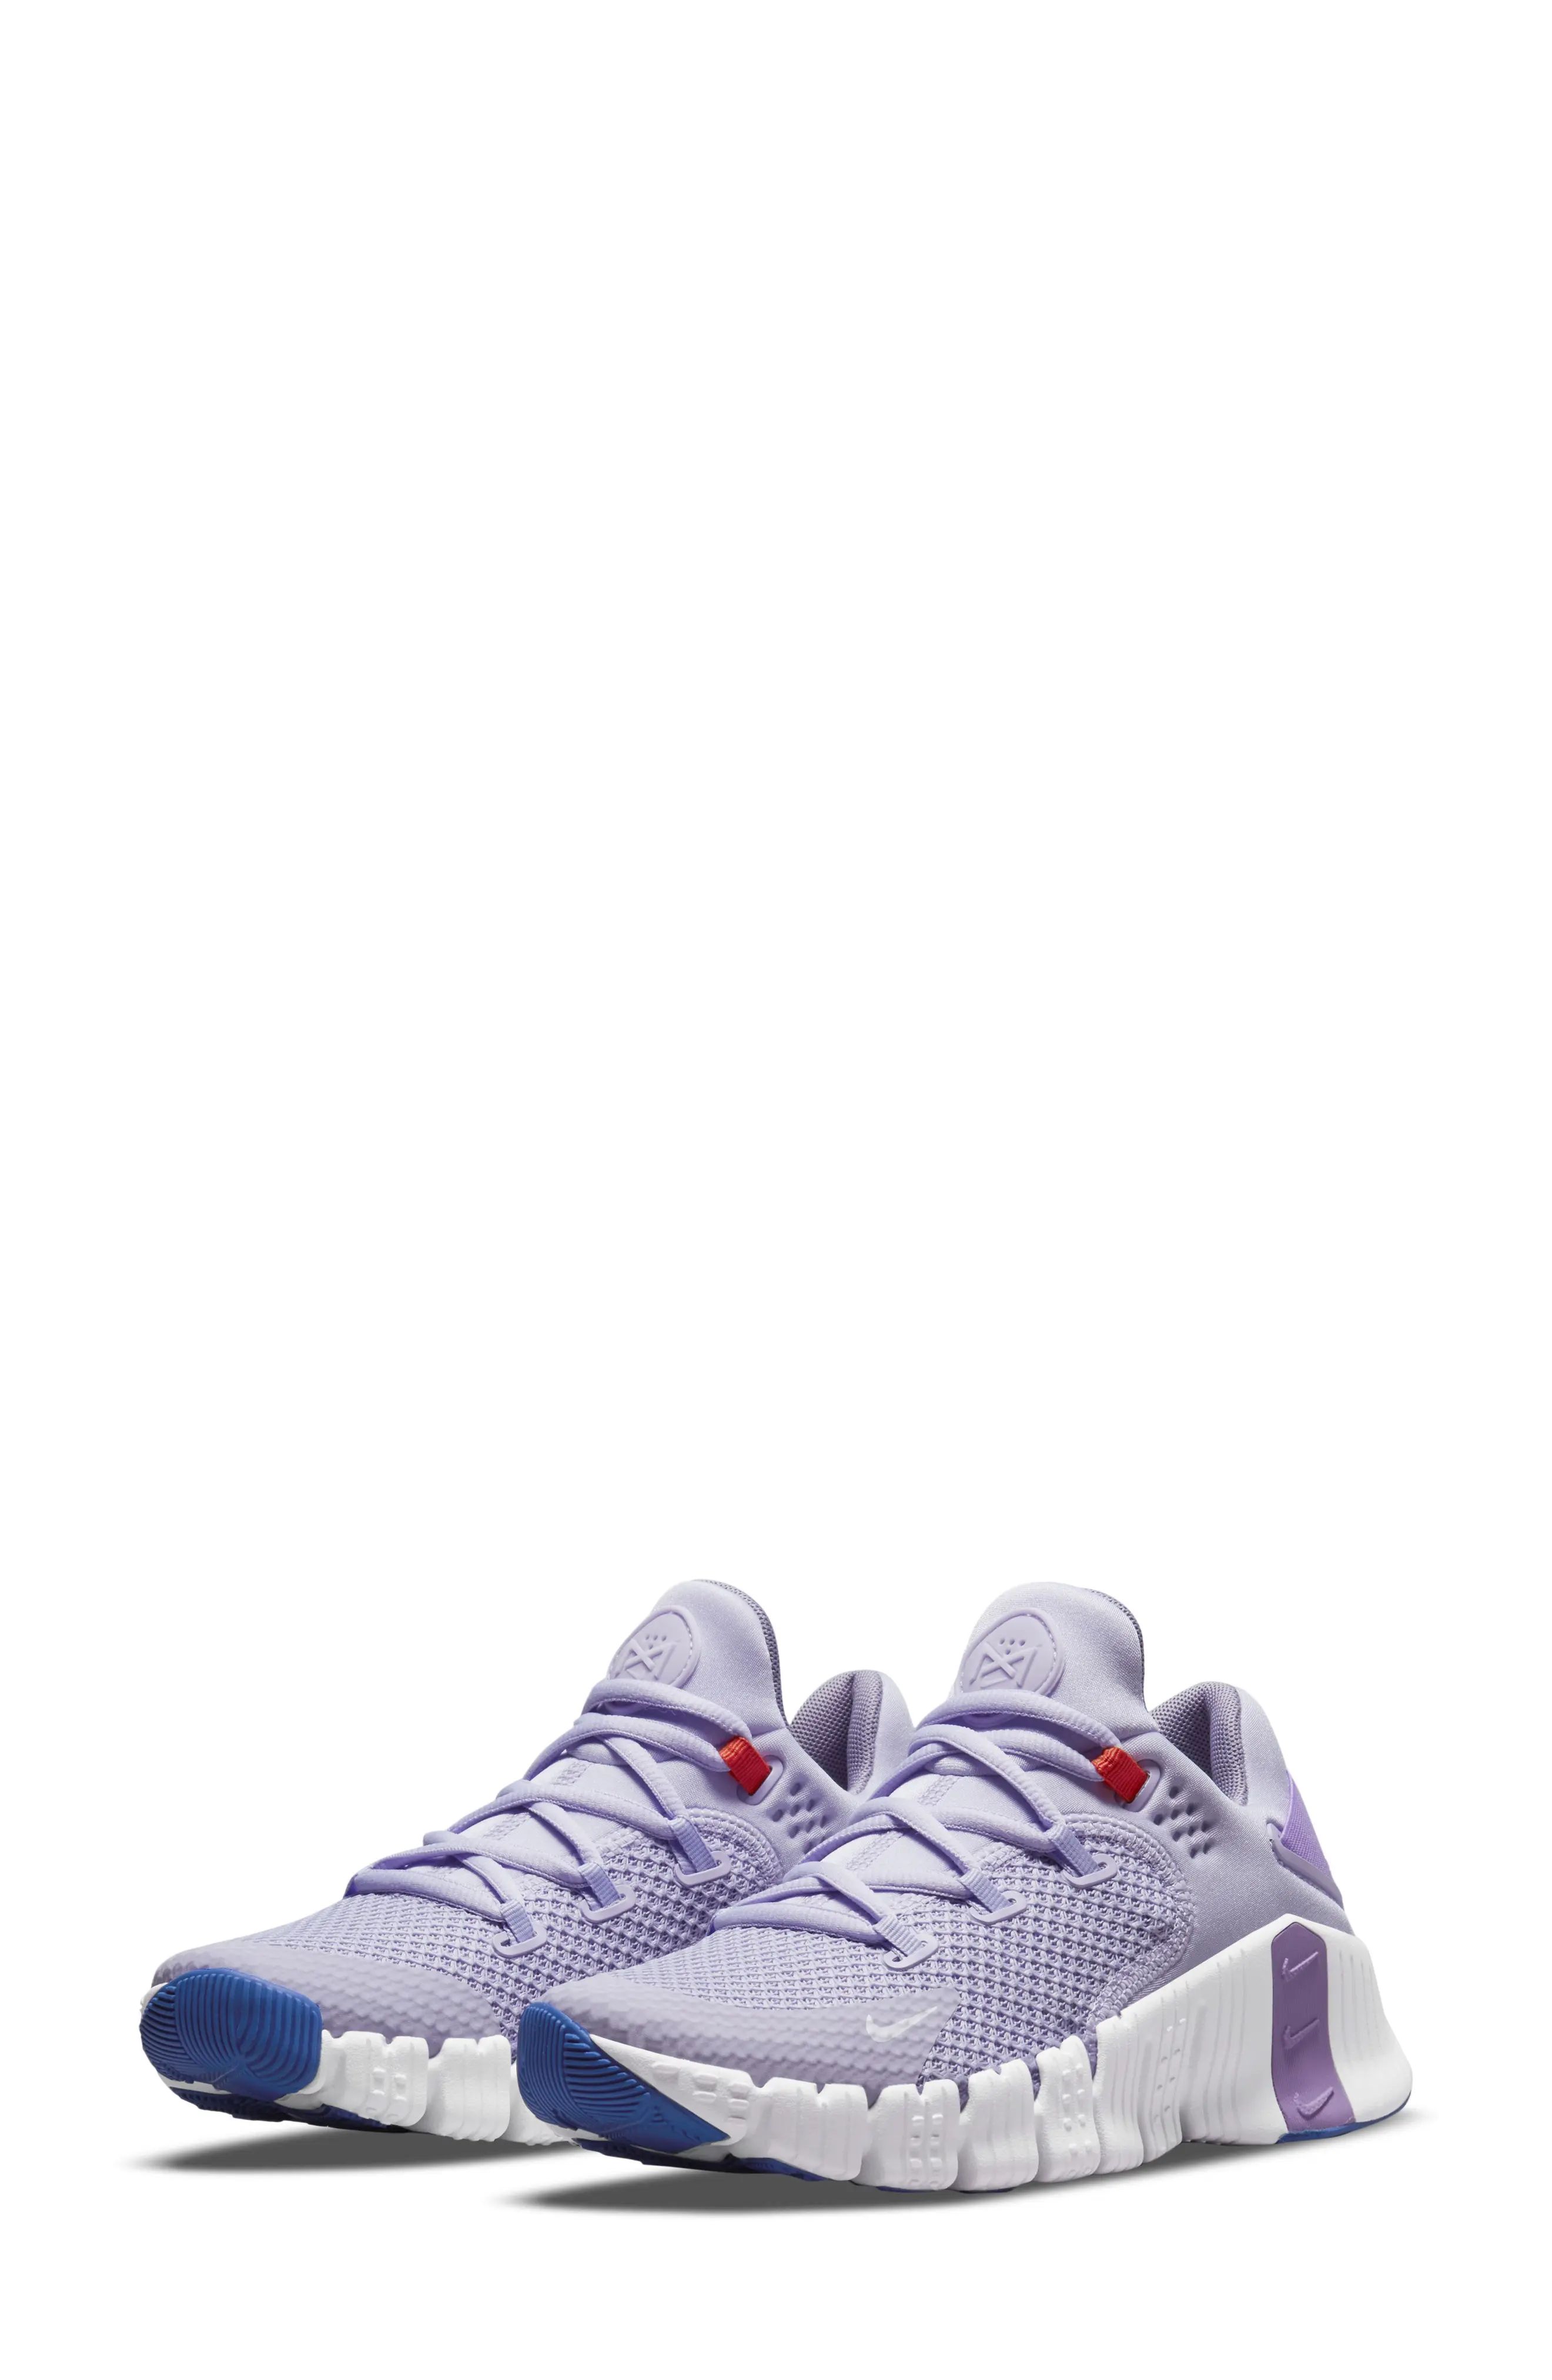 Nike Free Metcon 4 Training Shoe in Violet/Lilac/White at Nordstrom, Size 12 | Nordstrom